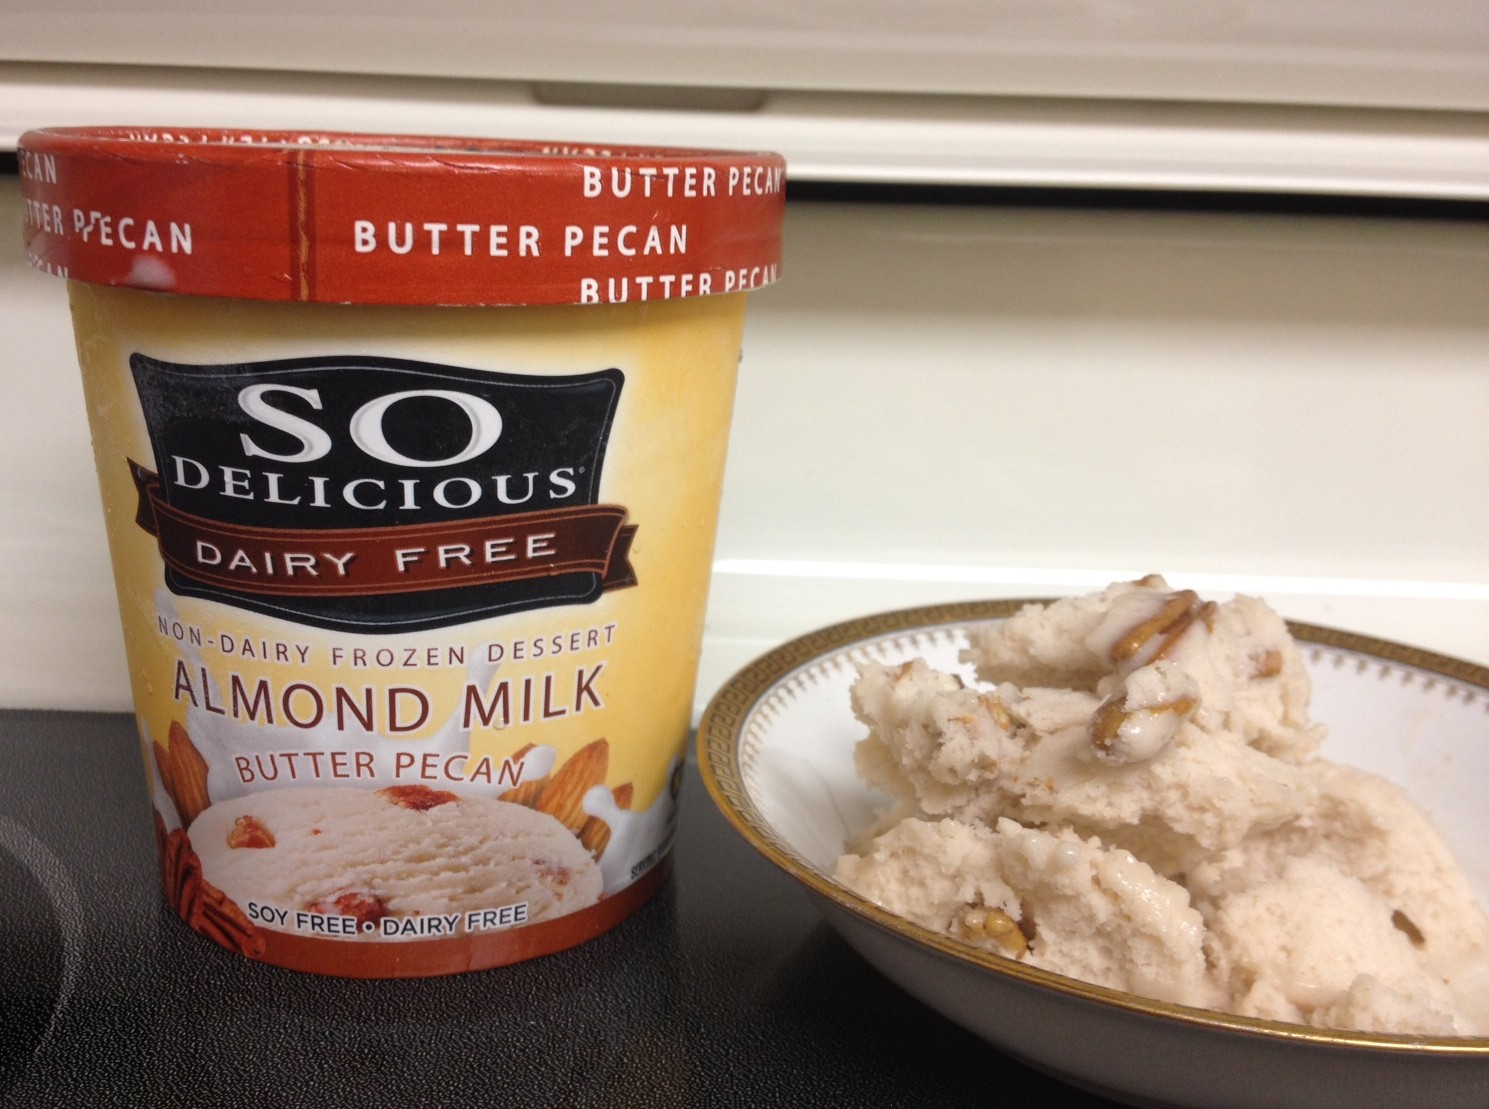 So Delicious Dairy Free Launches New Almond Milk Products!